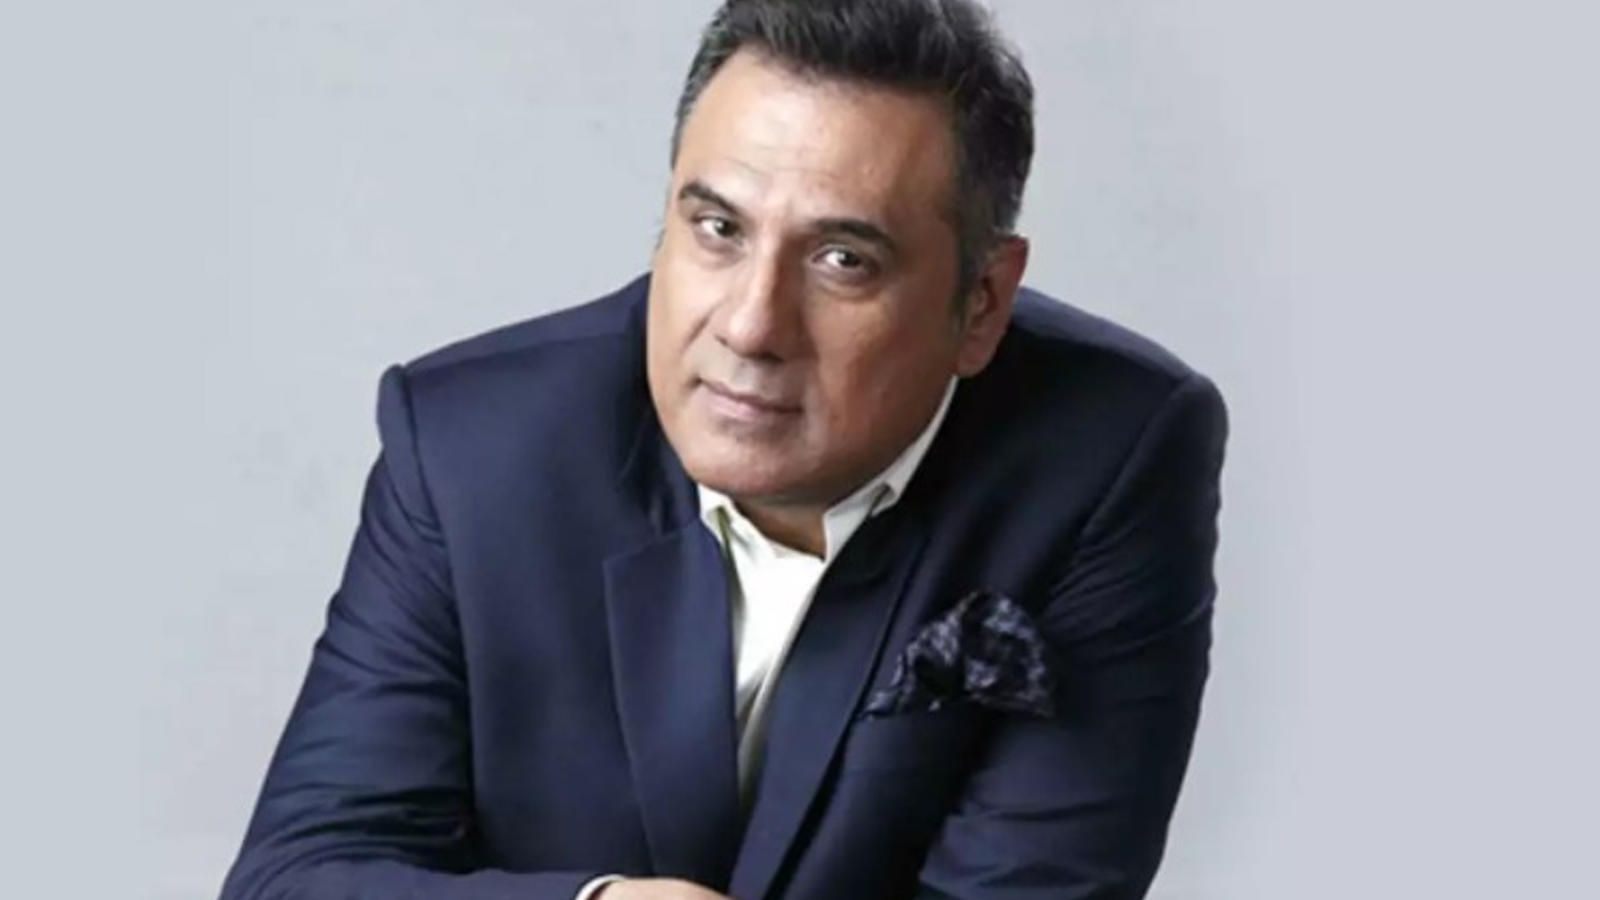 This Is How Boman Irani Brings Smile On The Faces Of Medical Staff And COVID 19 Patients Amid Crisis. Hindi Movie News Of India